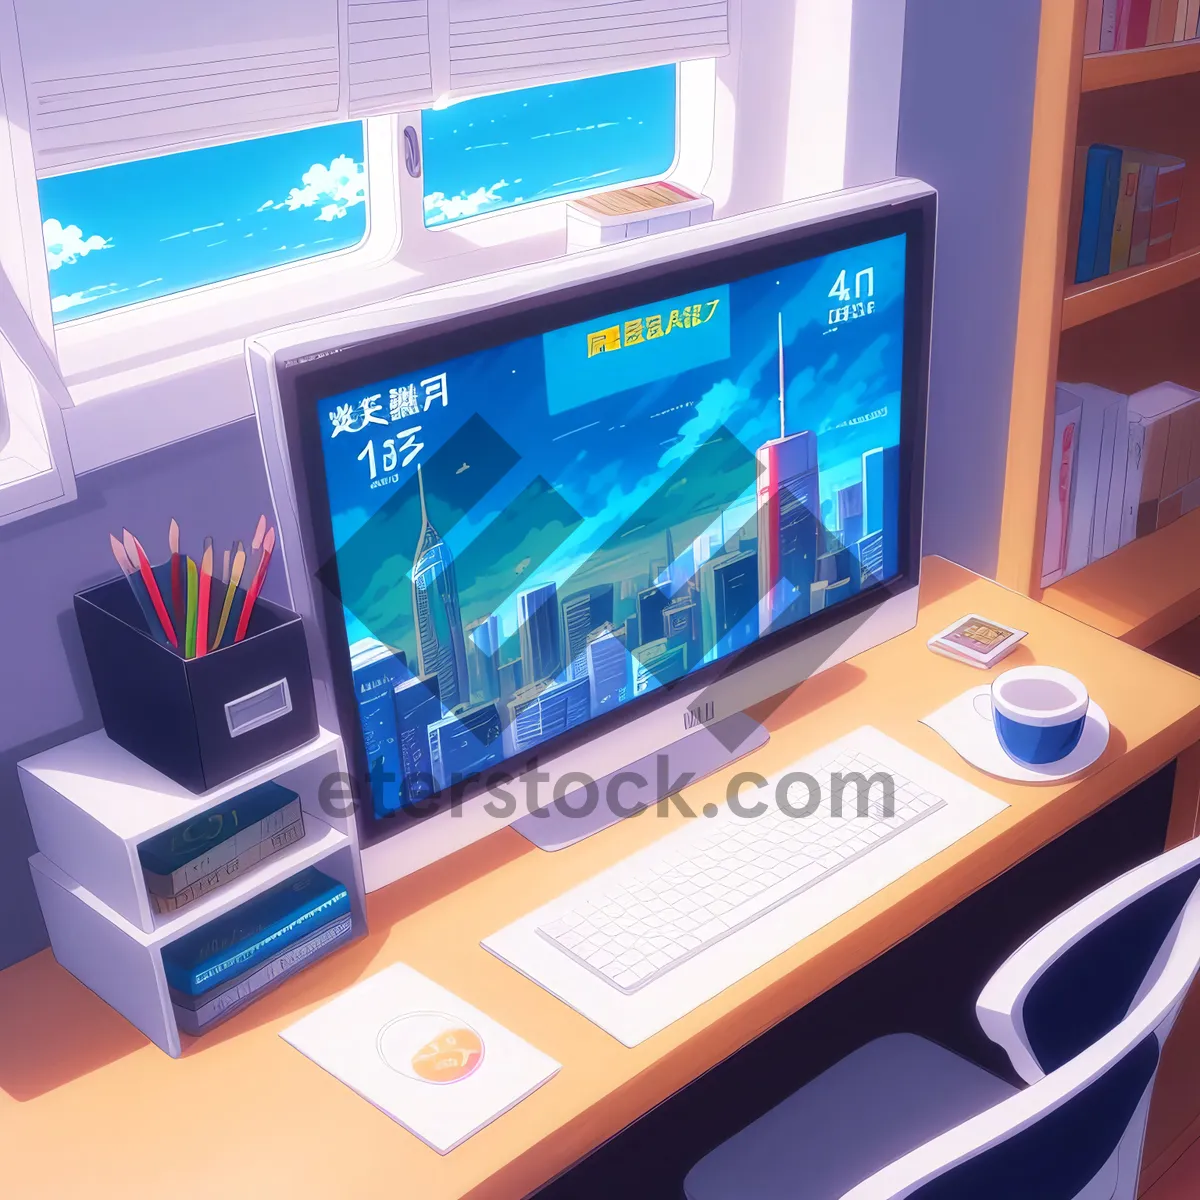 Picture of Advanced LED monitor for modern business communication